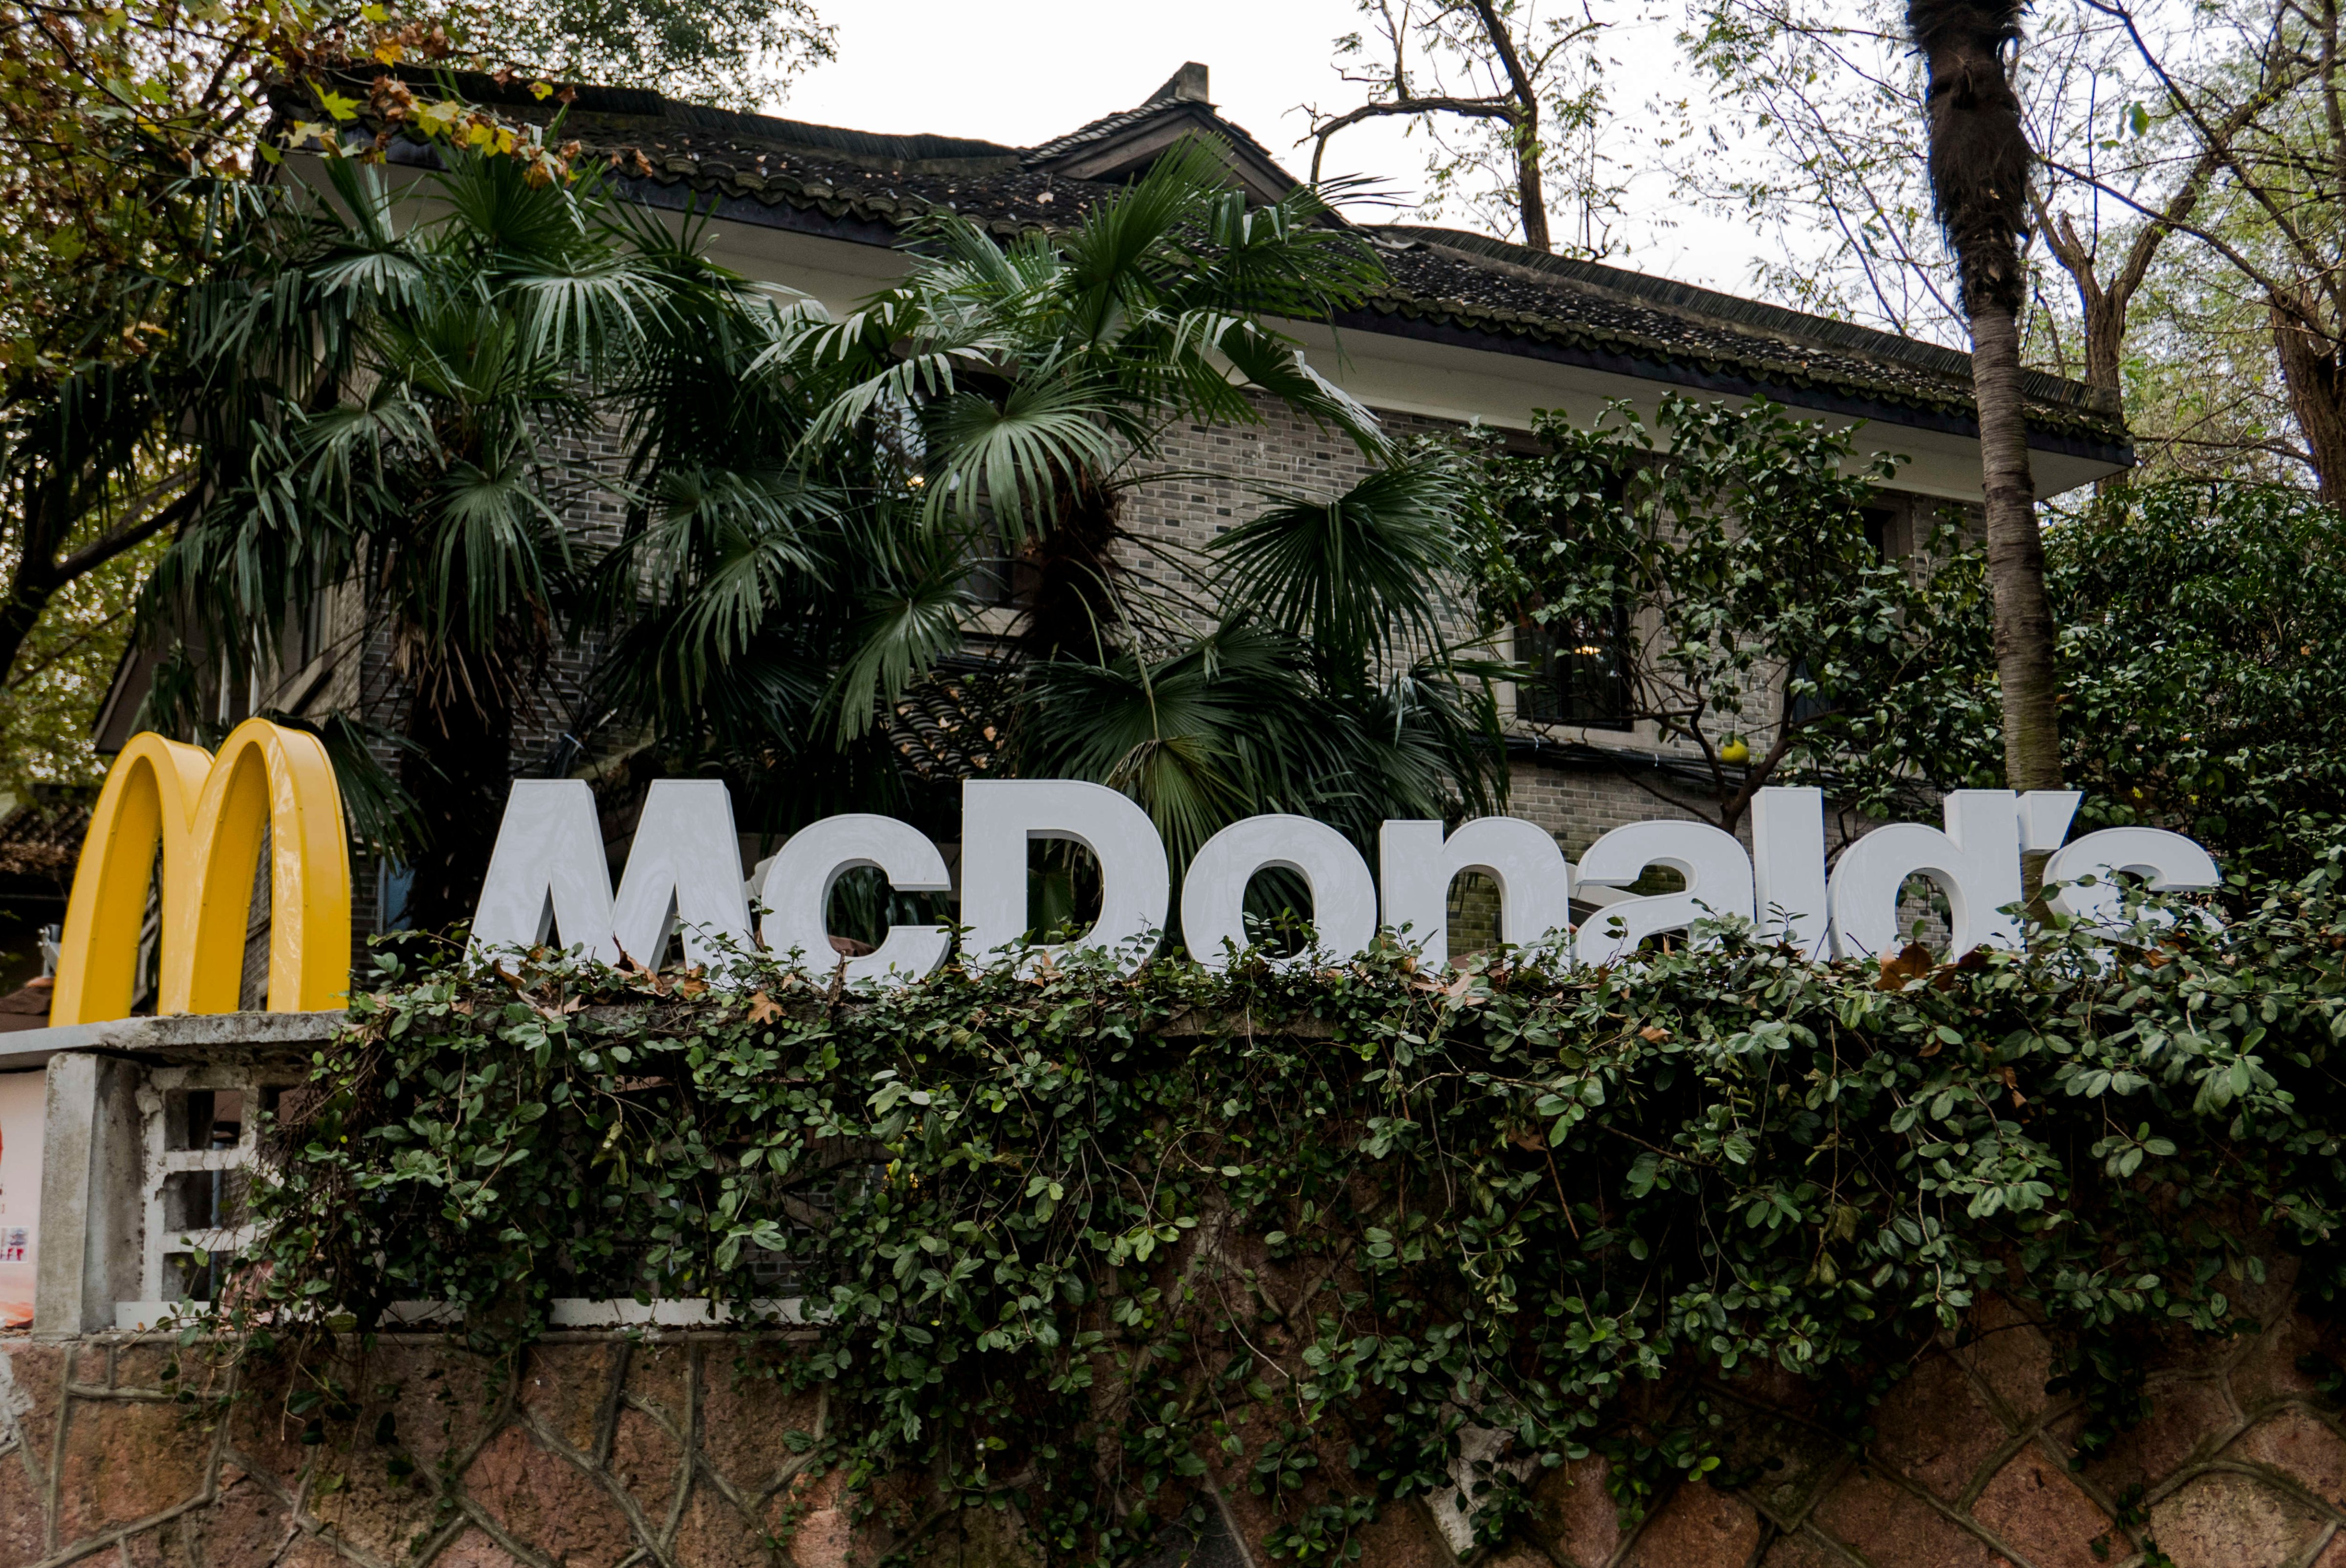 McDonald's opened an outlet in the home of former Taiwanese leader Chiang Ching-kuo beside West Lake. (Zhang Peng—LightRocket/Getty Images)